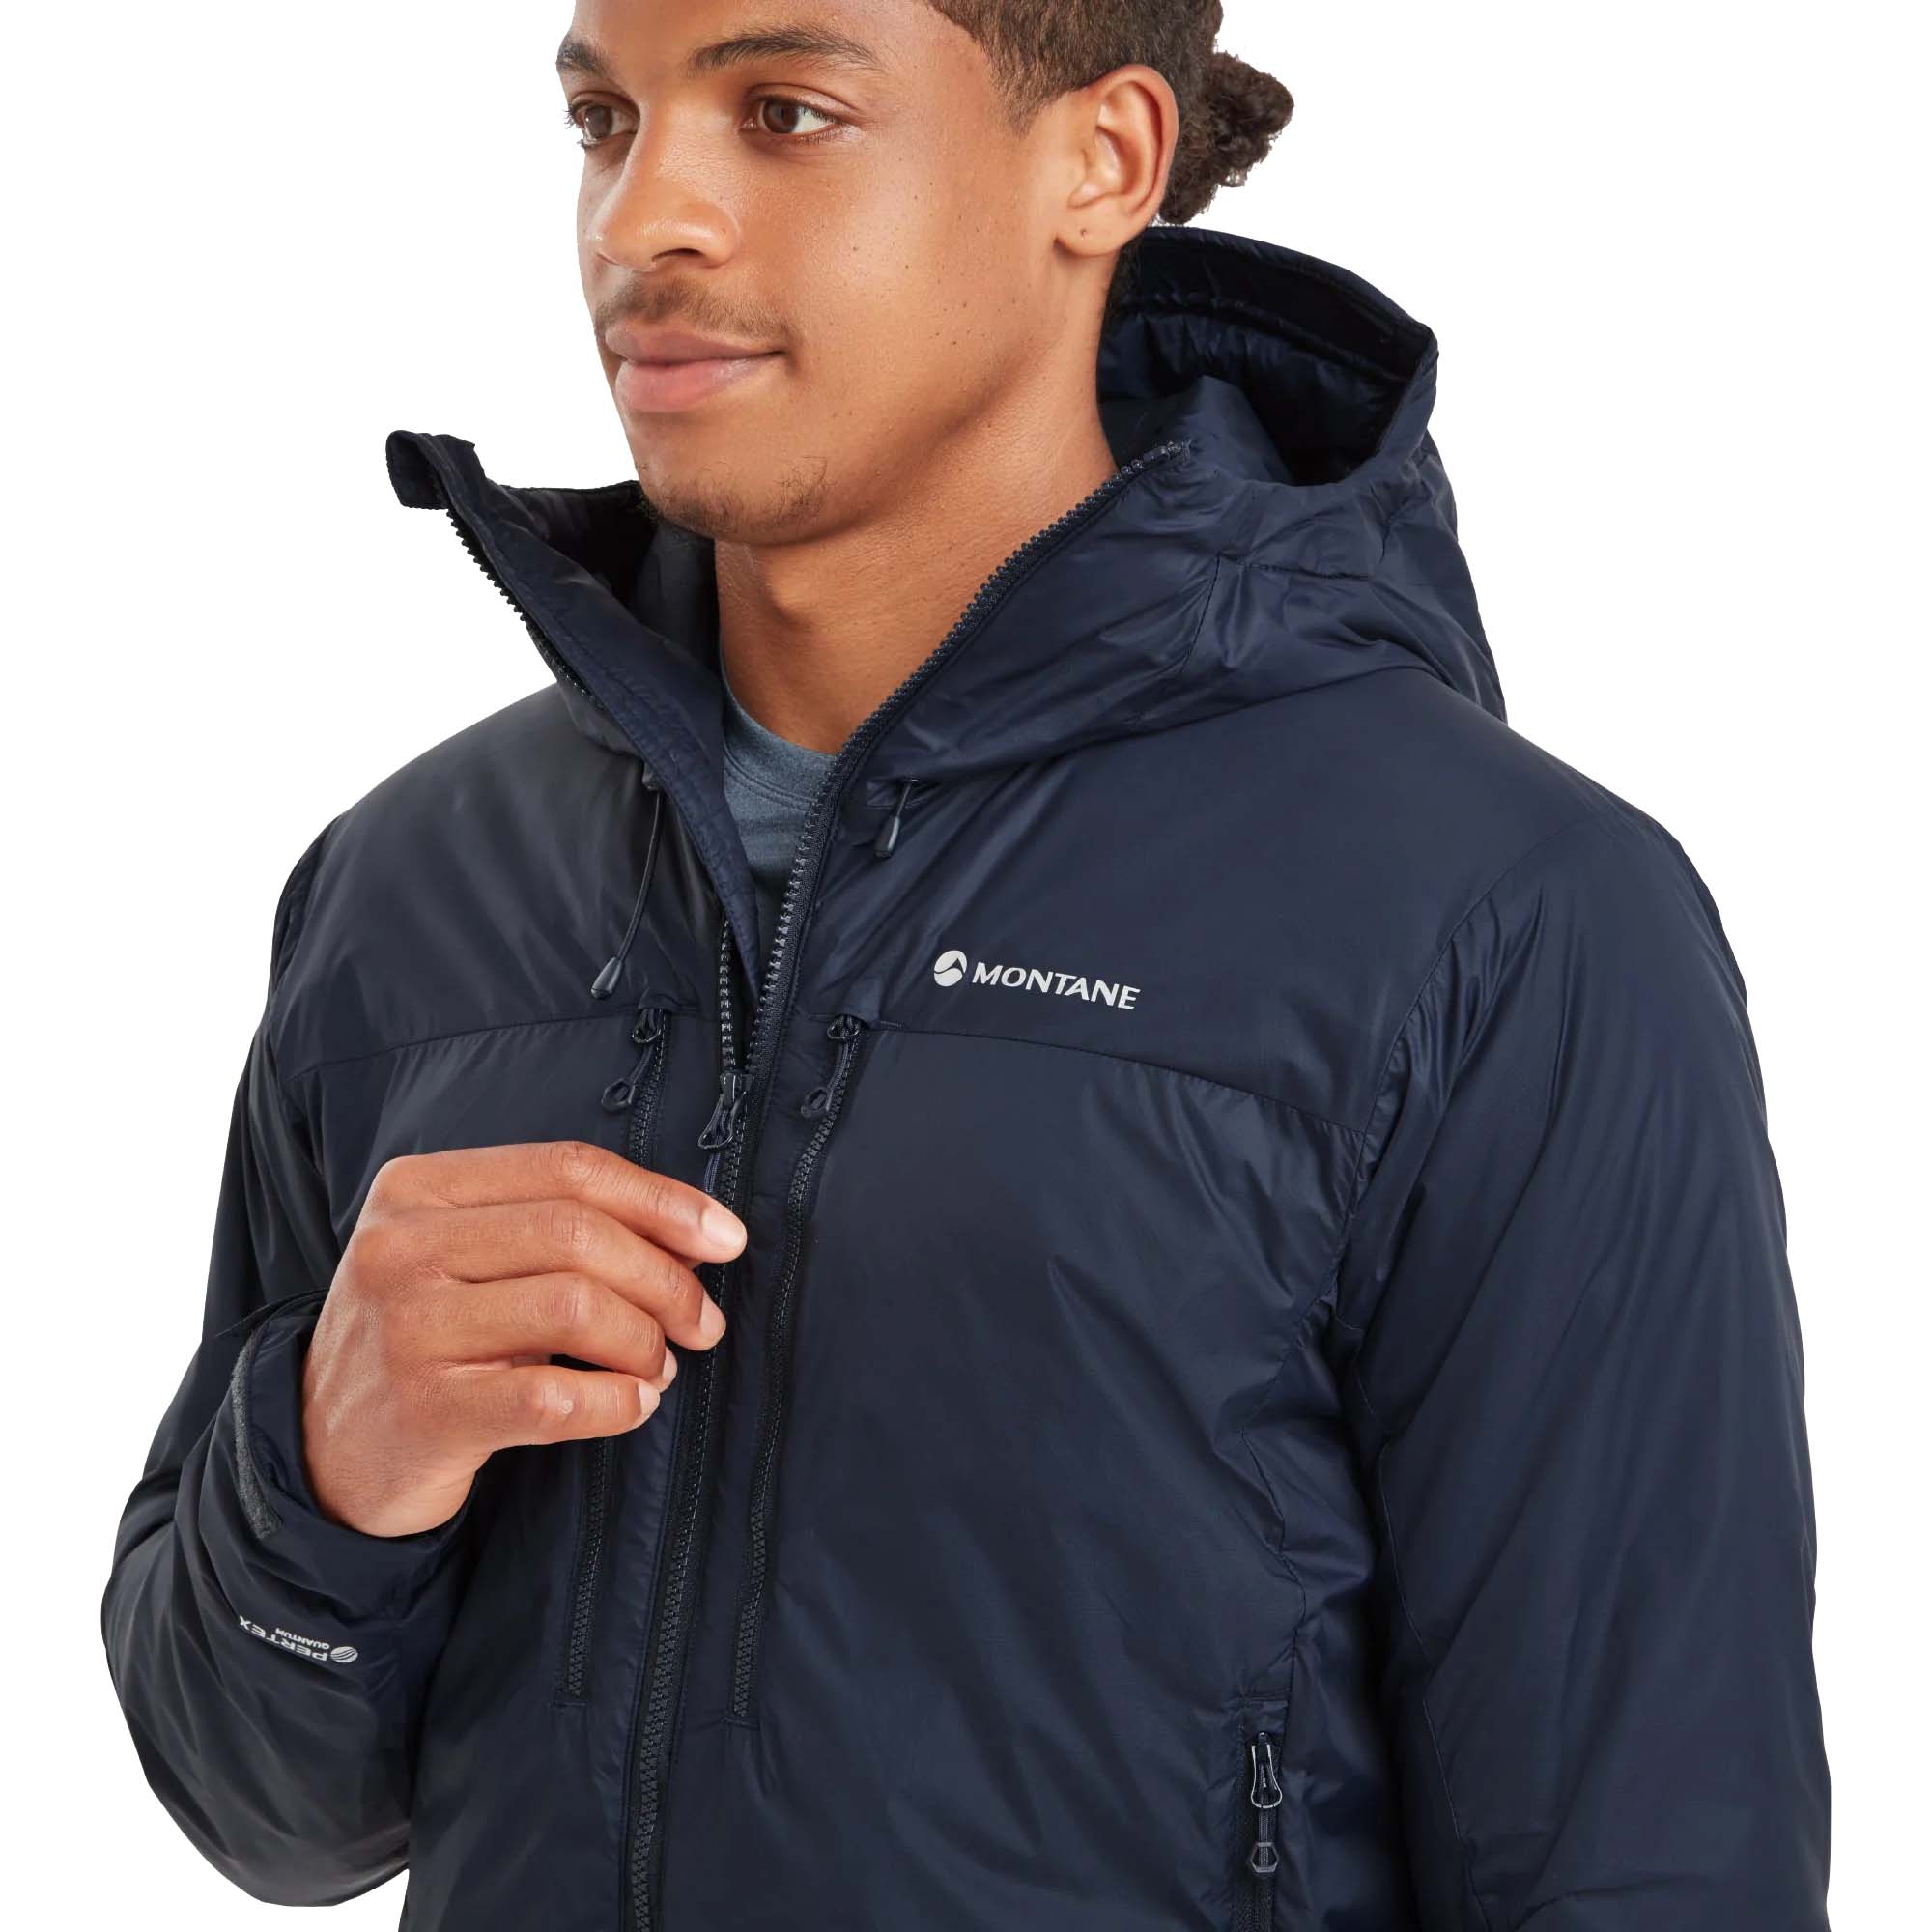 Montane Respond XT Insulated Hooded Jacket